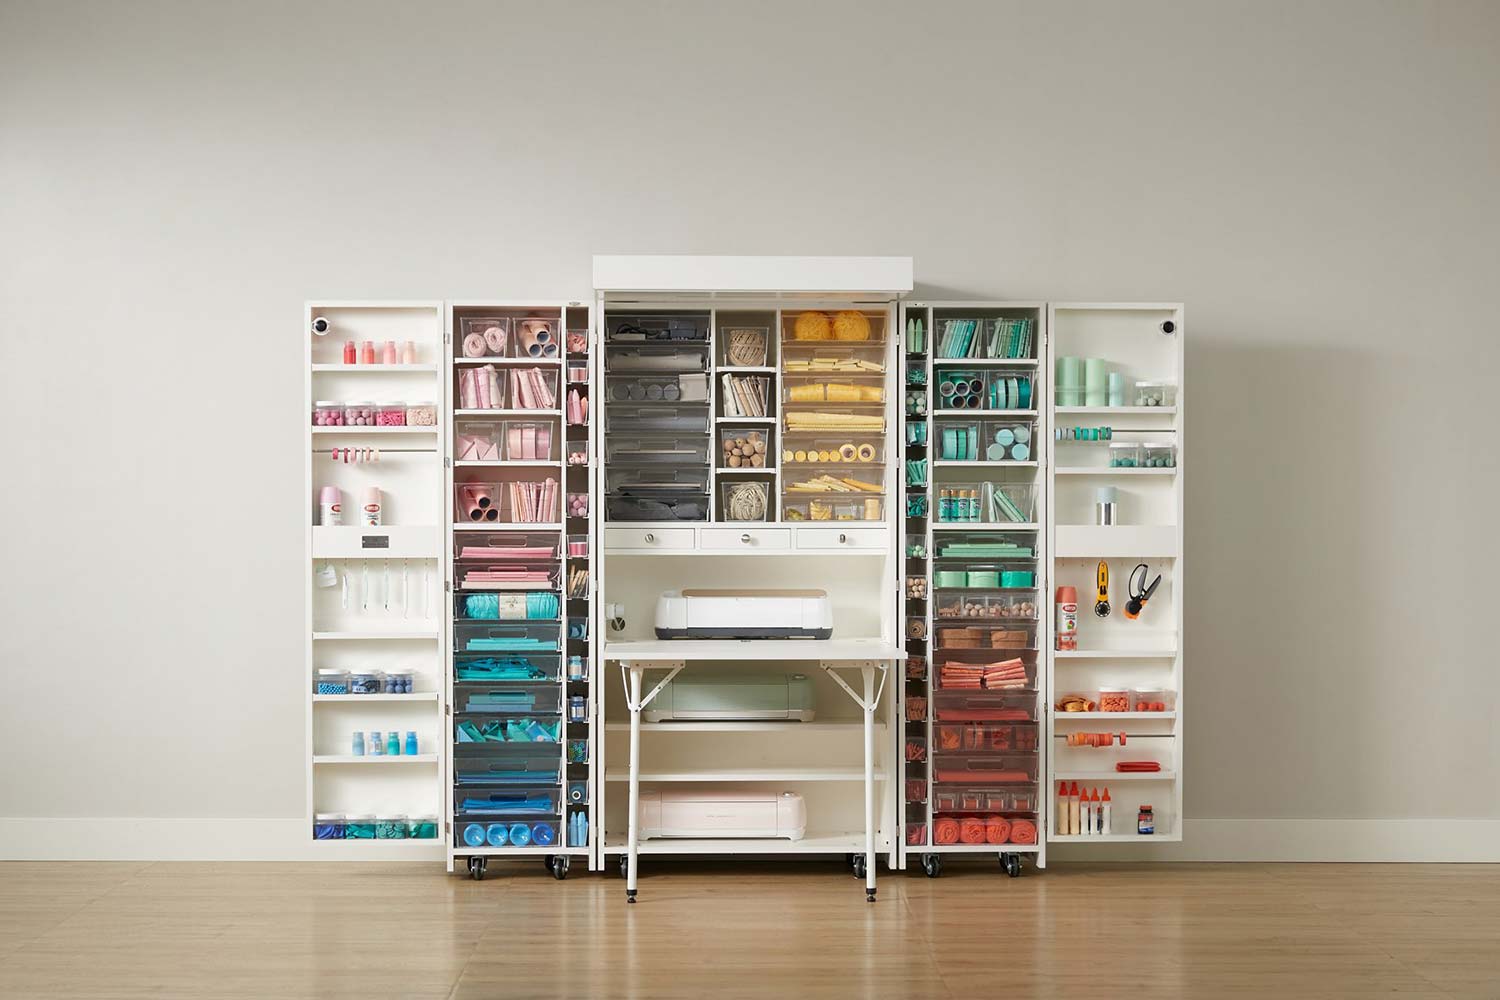 DreamBox Is A Storage Cabinet Meets Workspace For Crafters, 54% OFF